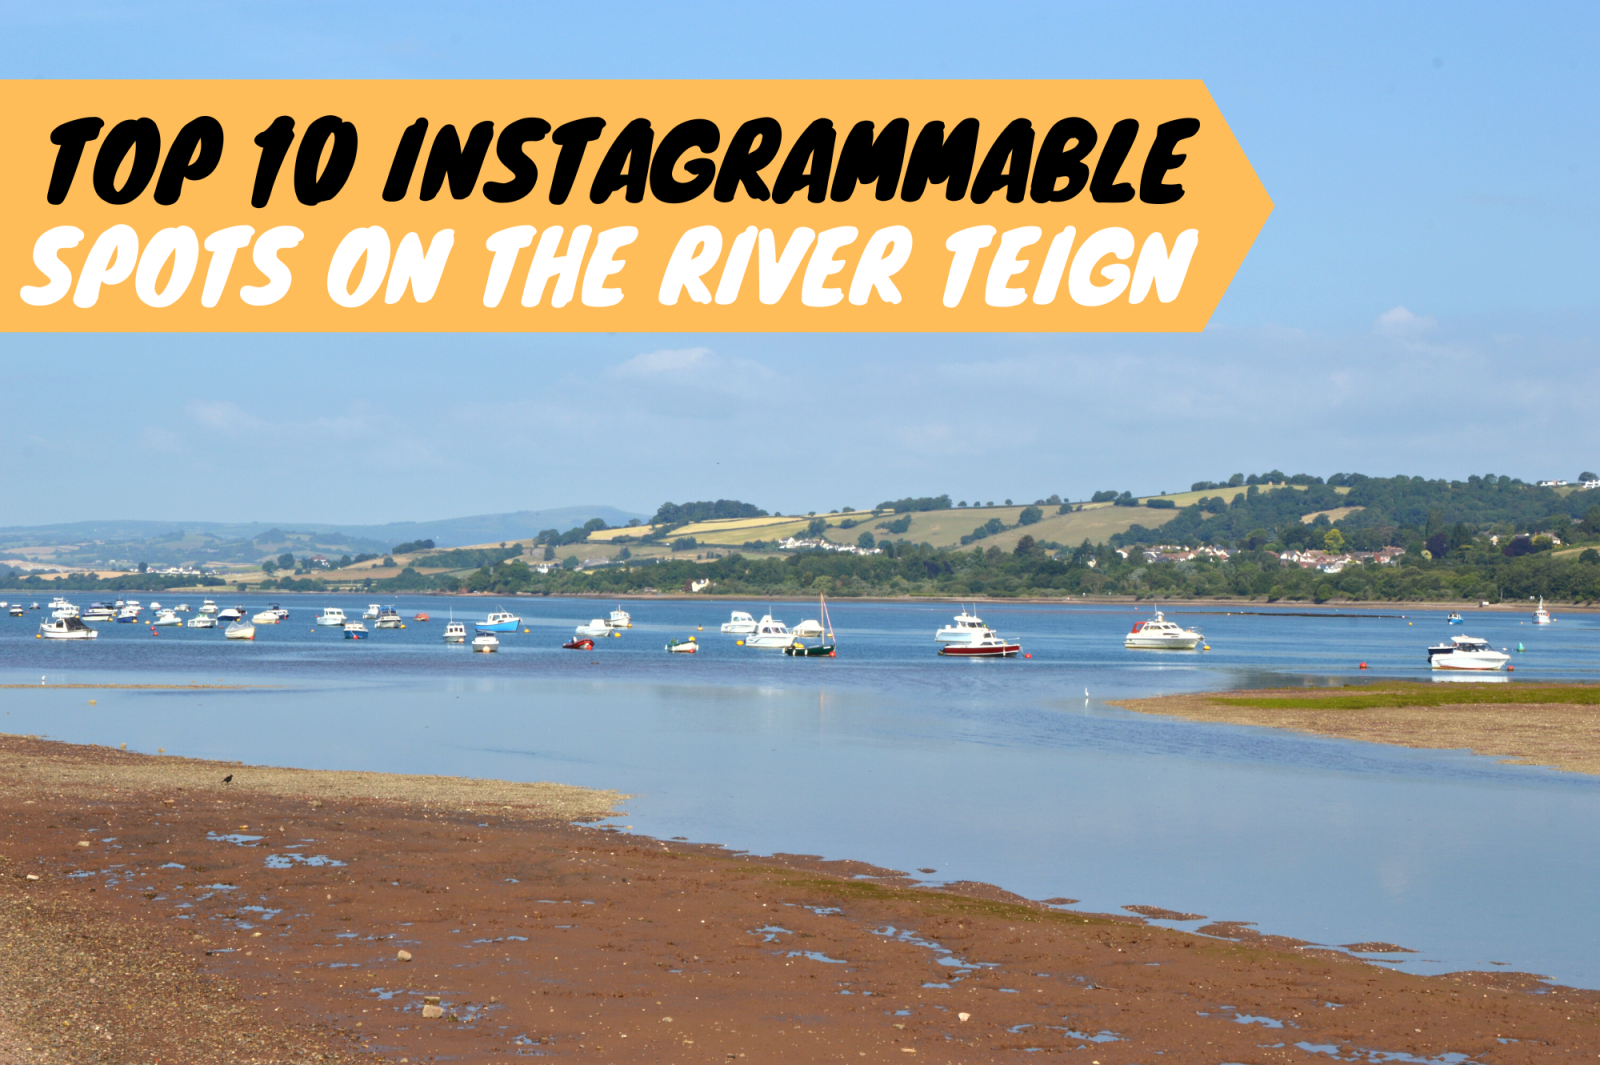 Instagrammable River Teign